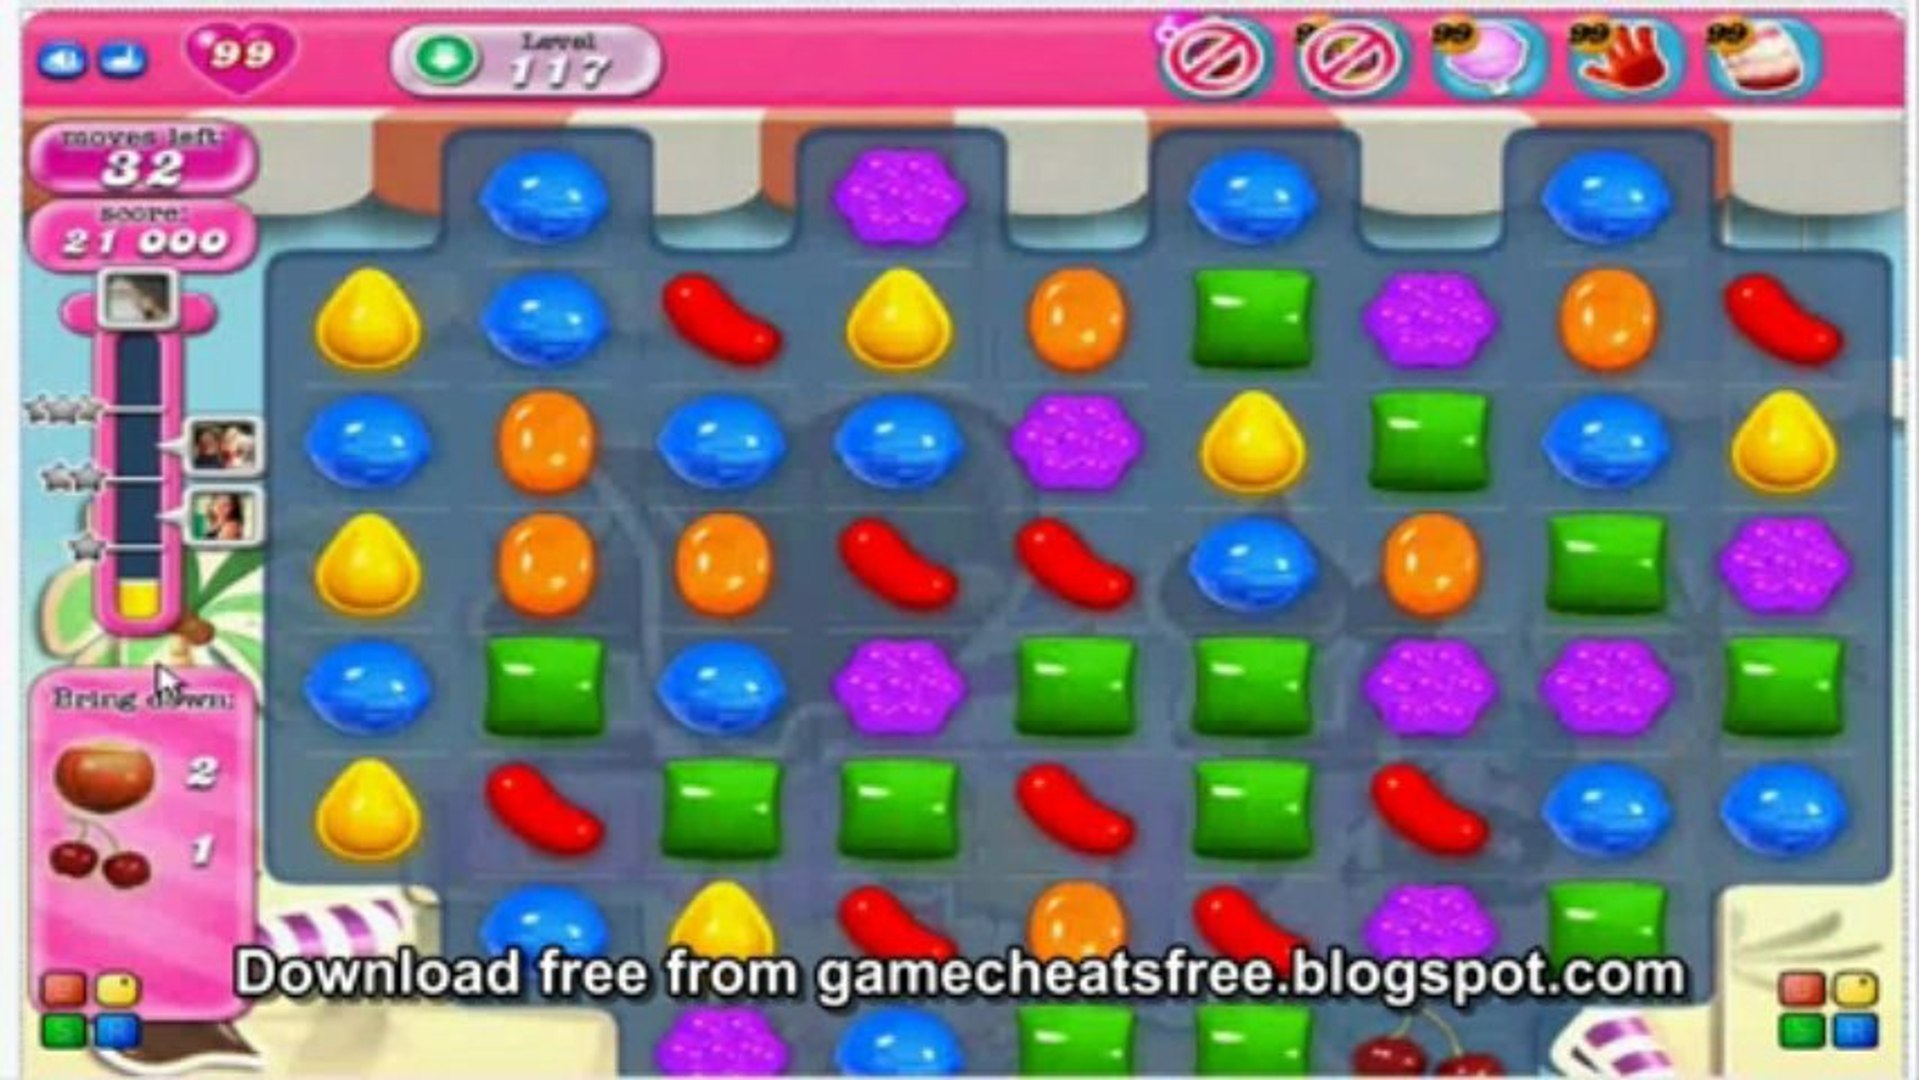 HOW TO GET UNLIMITED BOOSTERS IN Candy Crush Saga, ALL LEVELS UNLOCKED